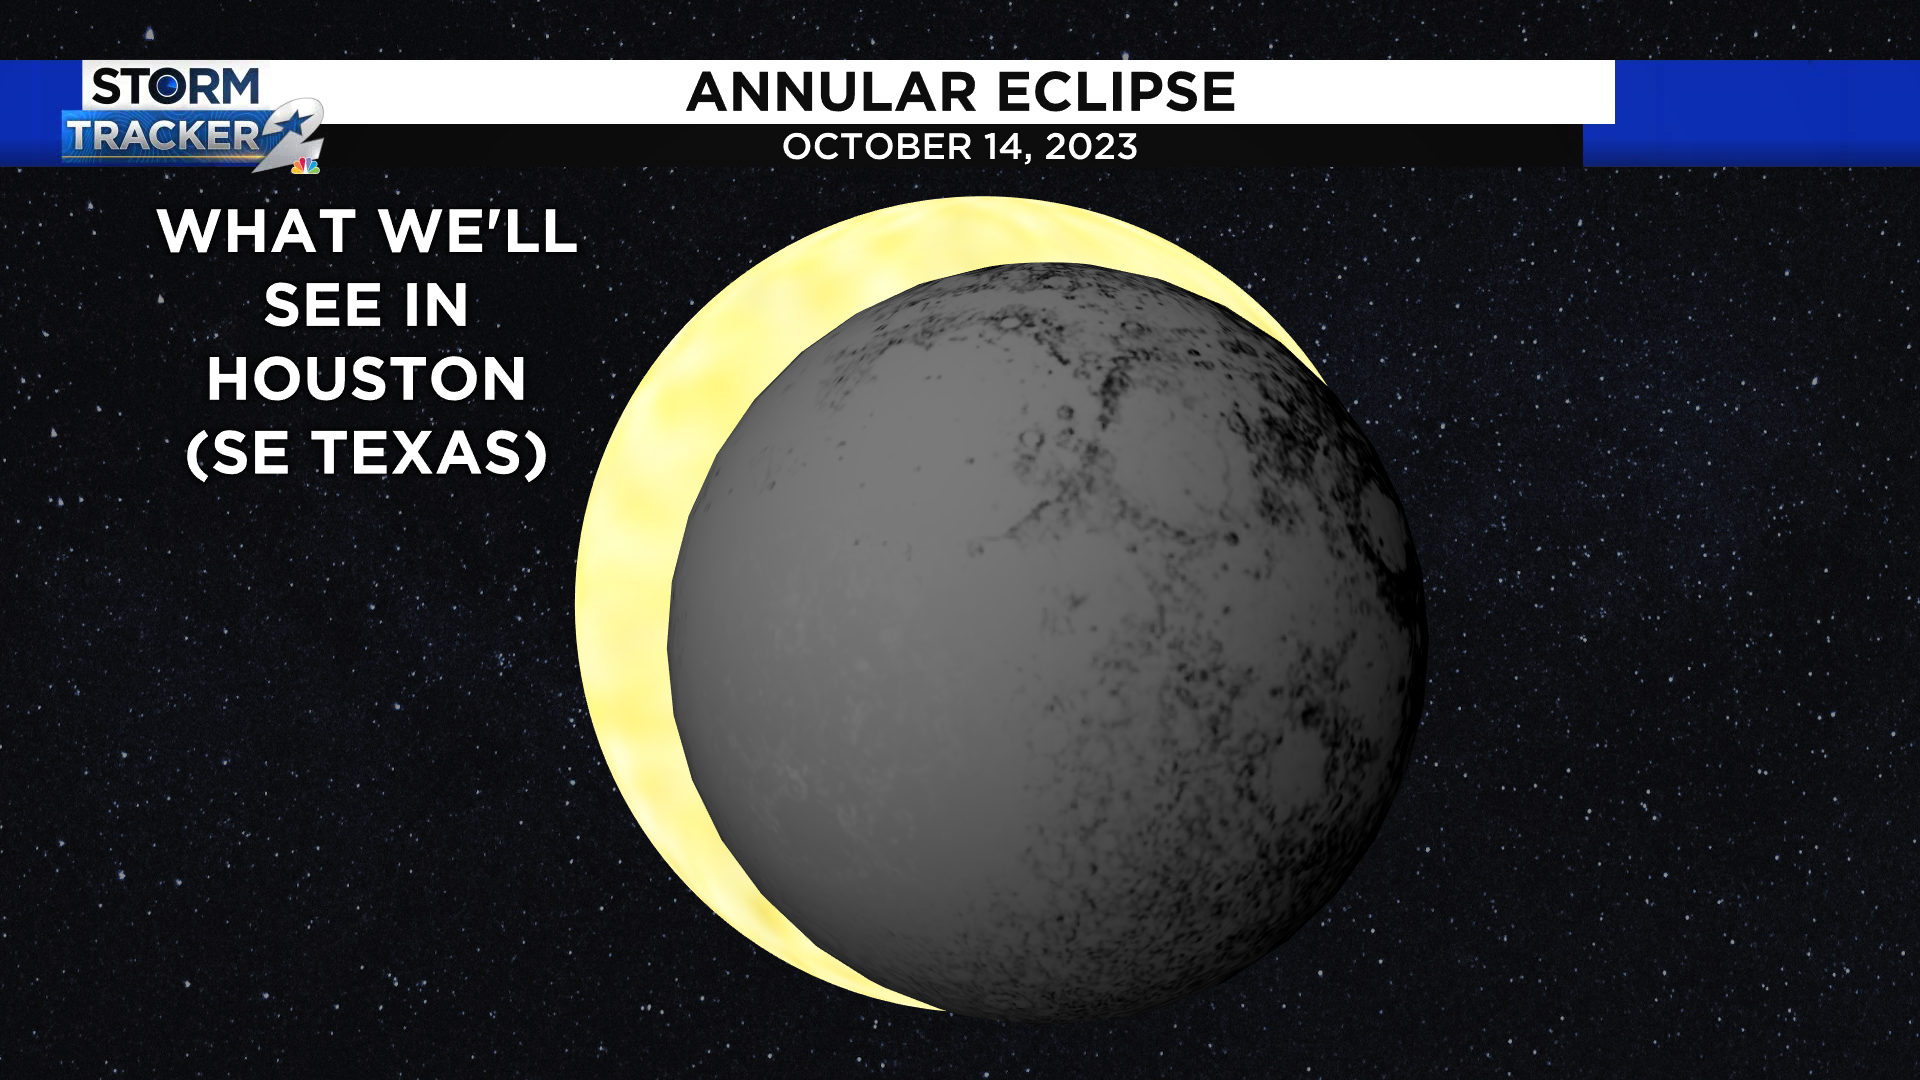 Everything you need to know about seeing the annular solar eclipse